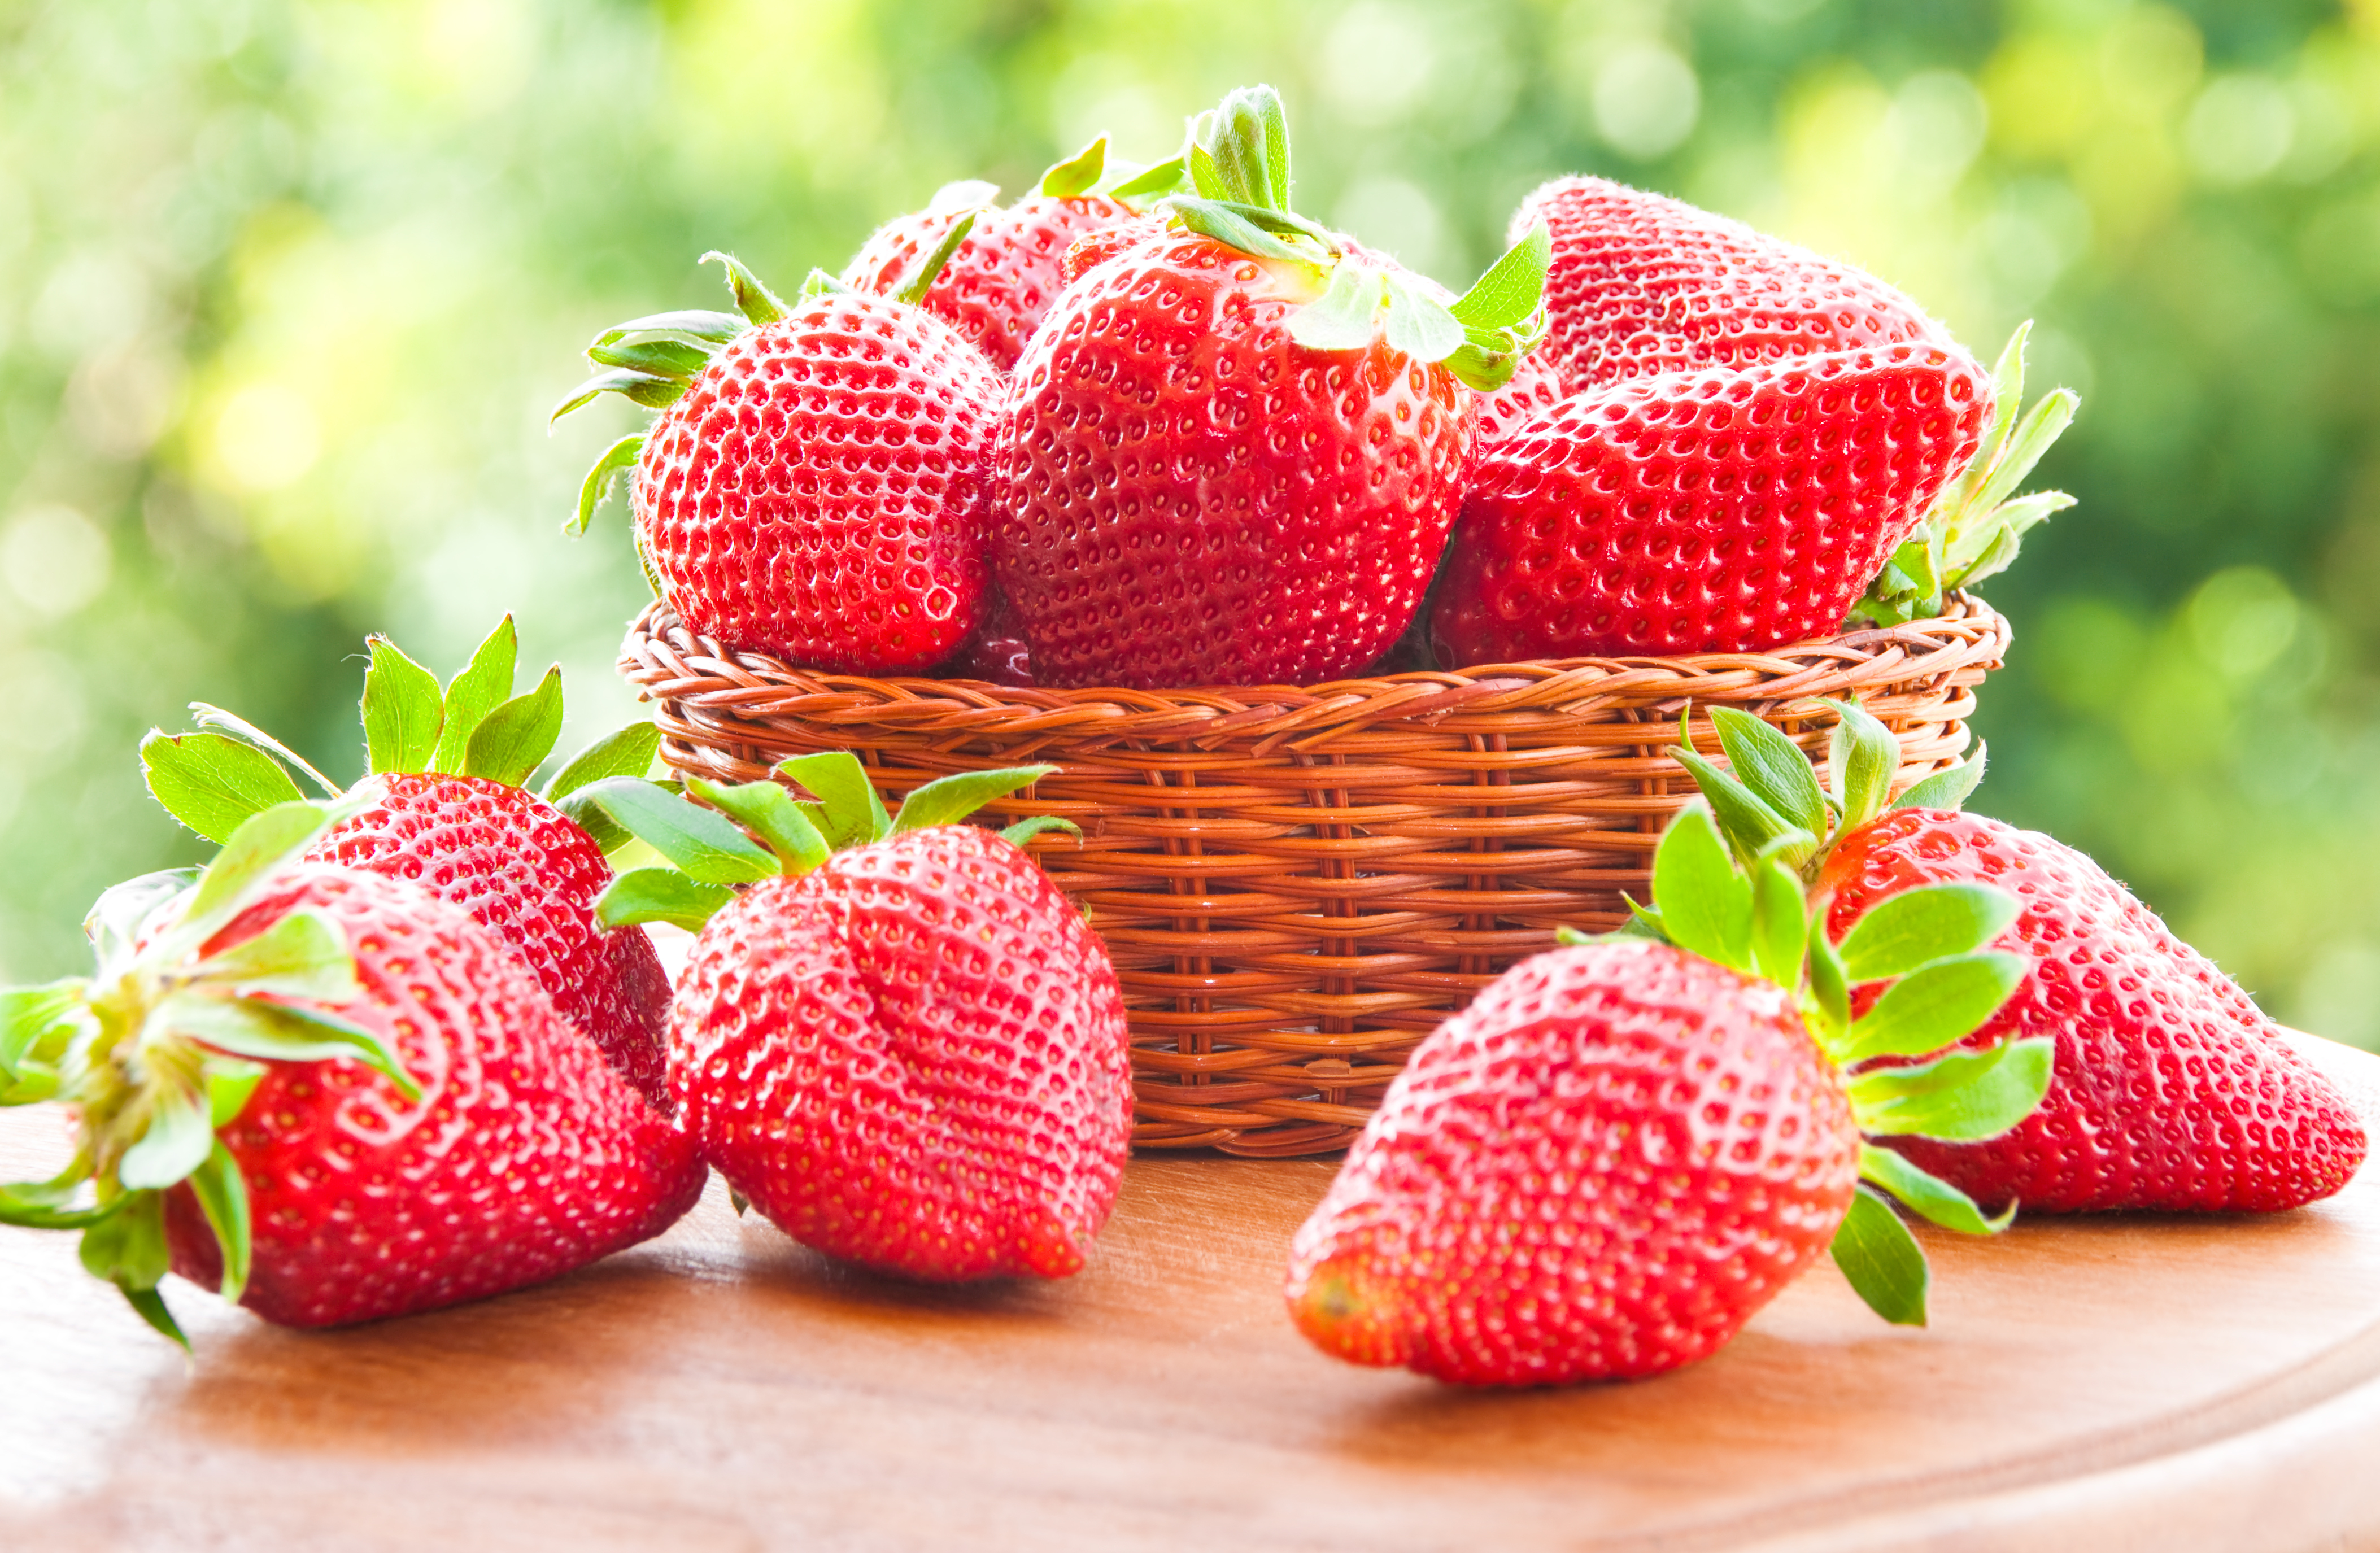 strawberry, basket, food, berry, red, fruits